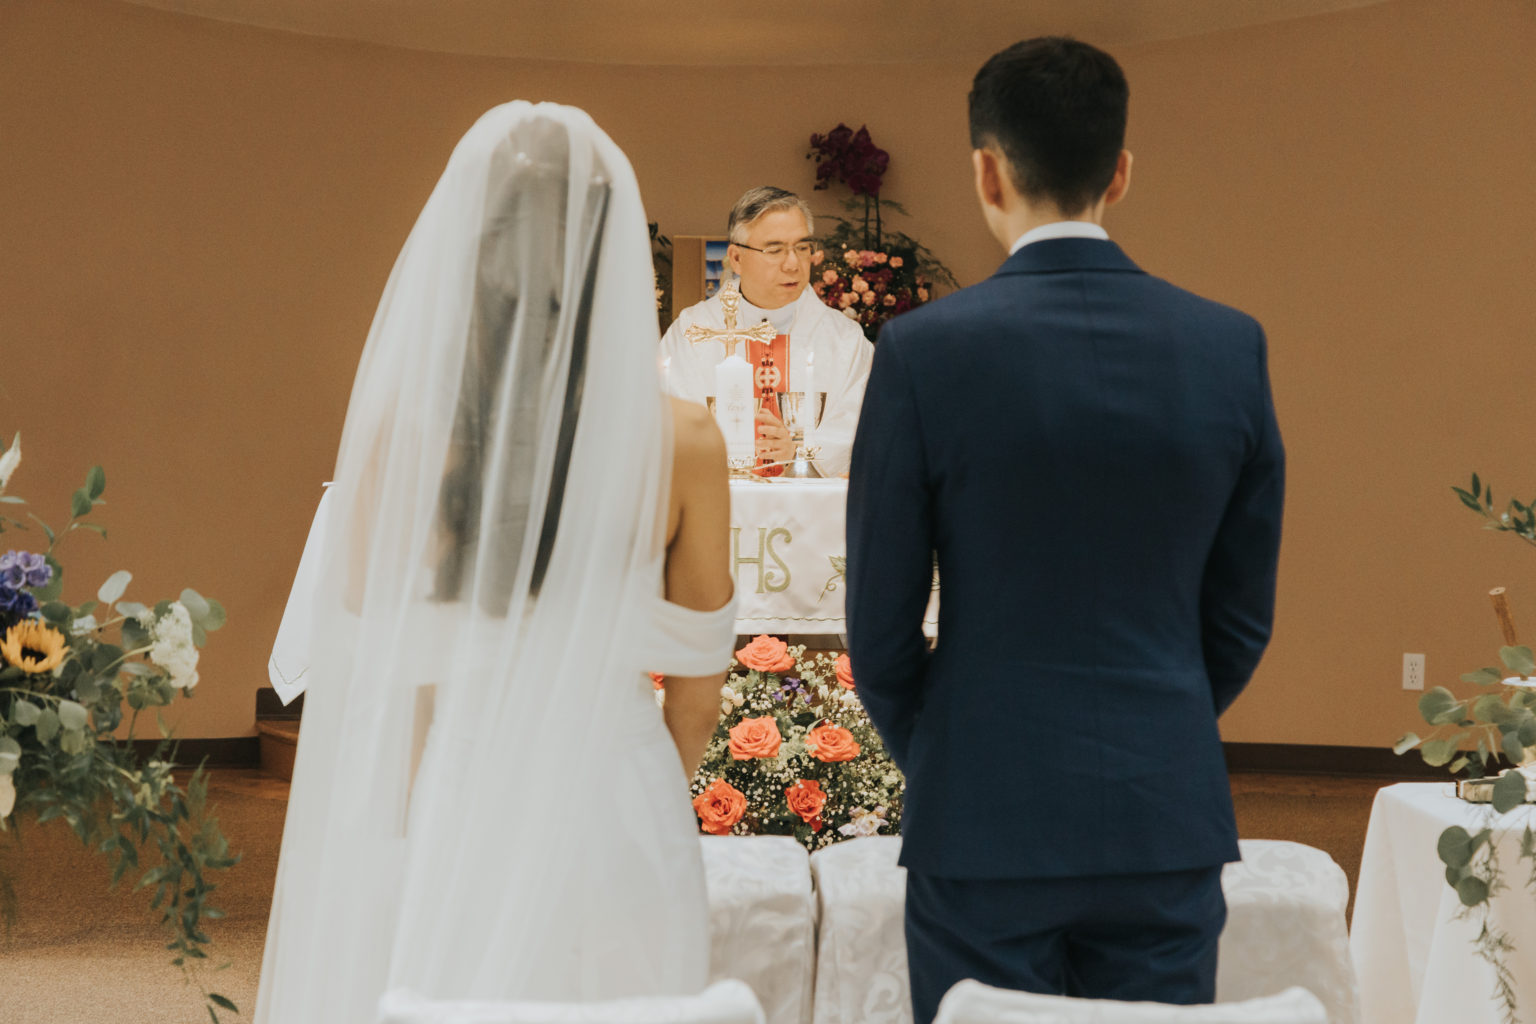 Small Talk Before You Have a Chat With The Wedding Officiant